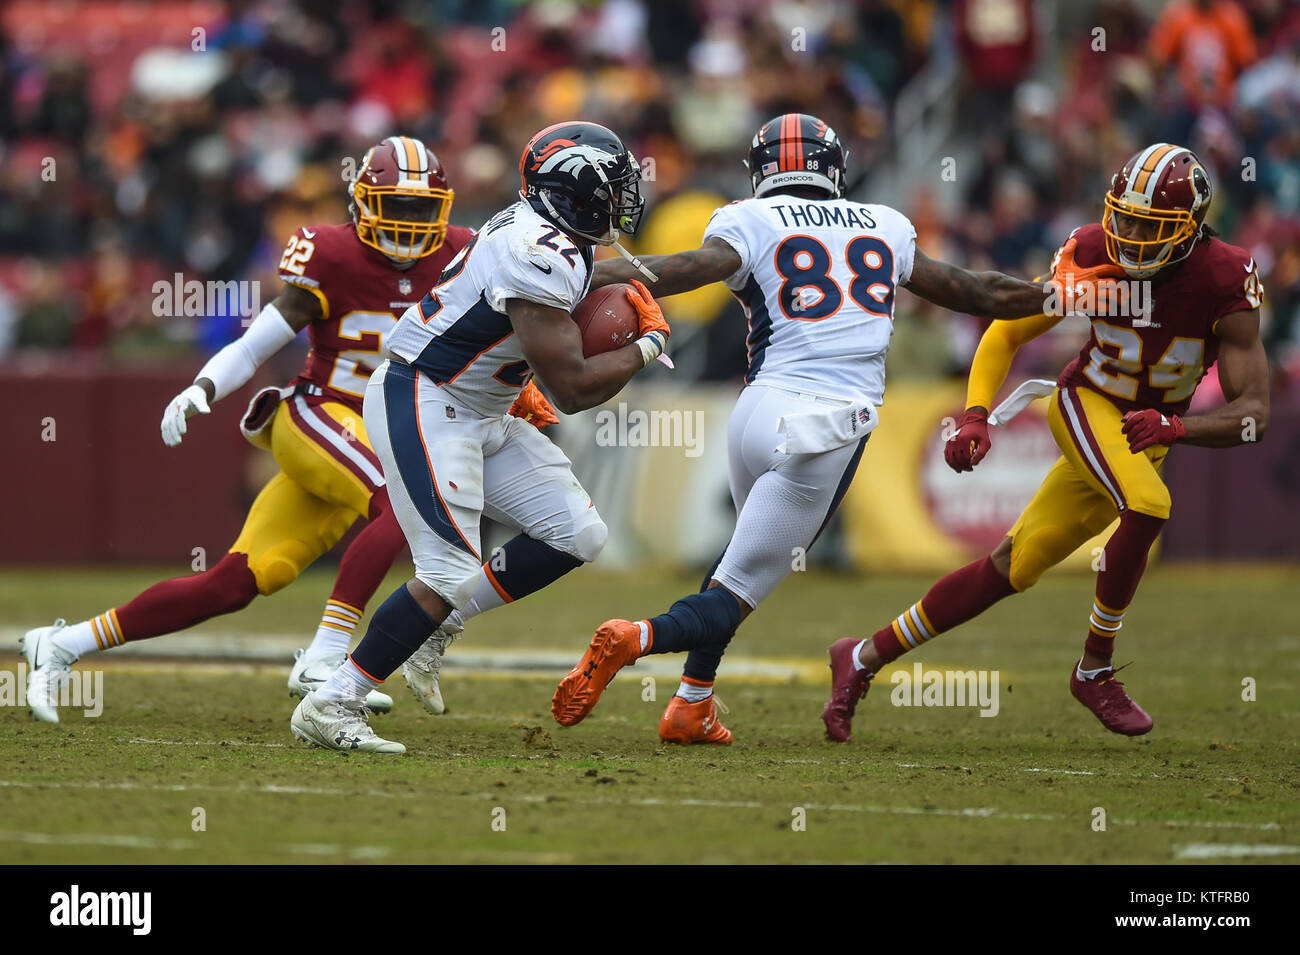 Landover, MD, USA. 24th Dec, 2017. Denver Broncos running back C.J. Anderson (22) rushes with the ball during the season ending home matchup between the Denver Broncos and the Washington Redskins at FedEx Field in Landover, MD. Credit: csm/Alamy Live News Stock Photo